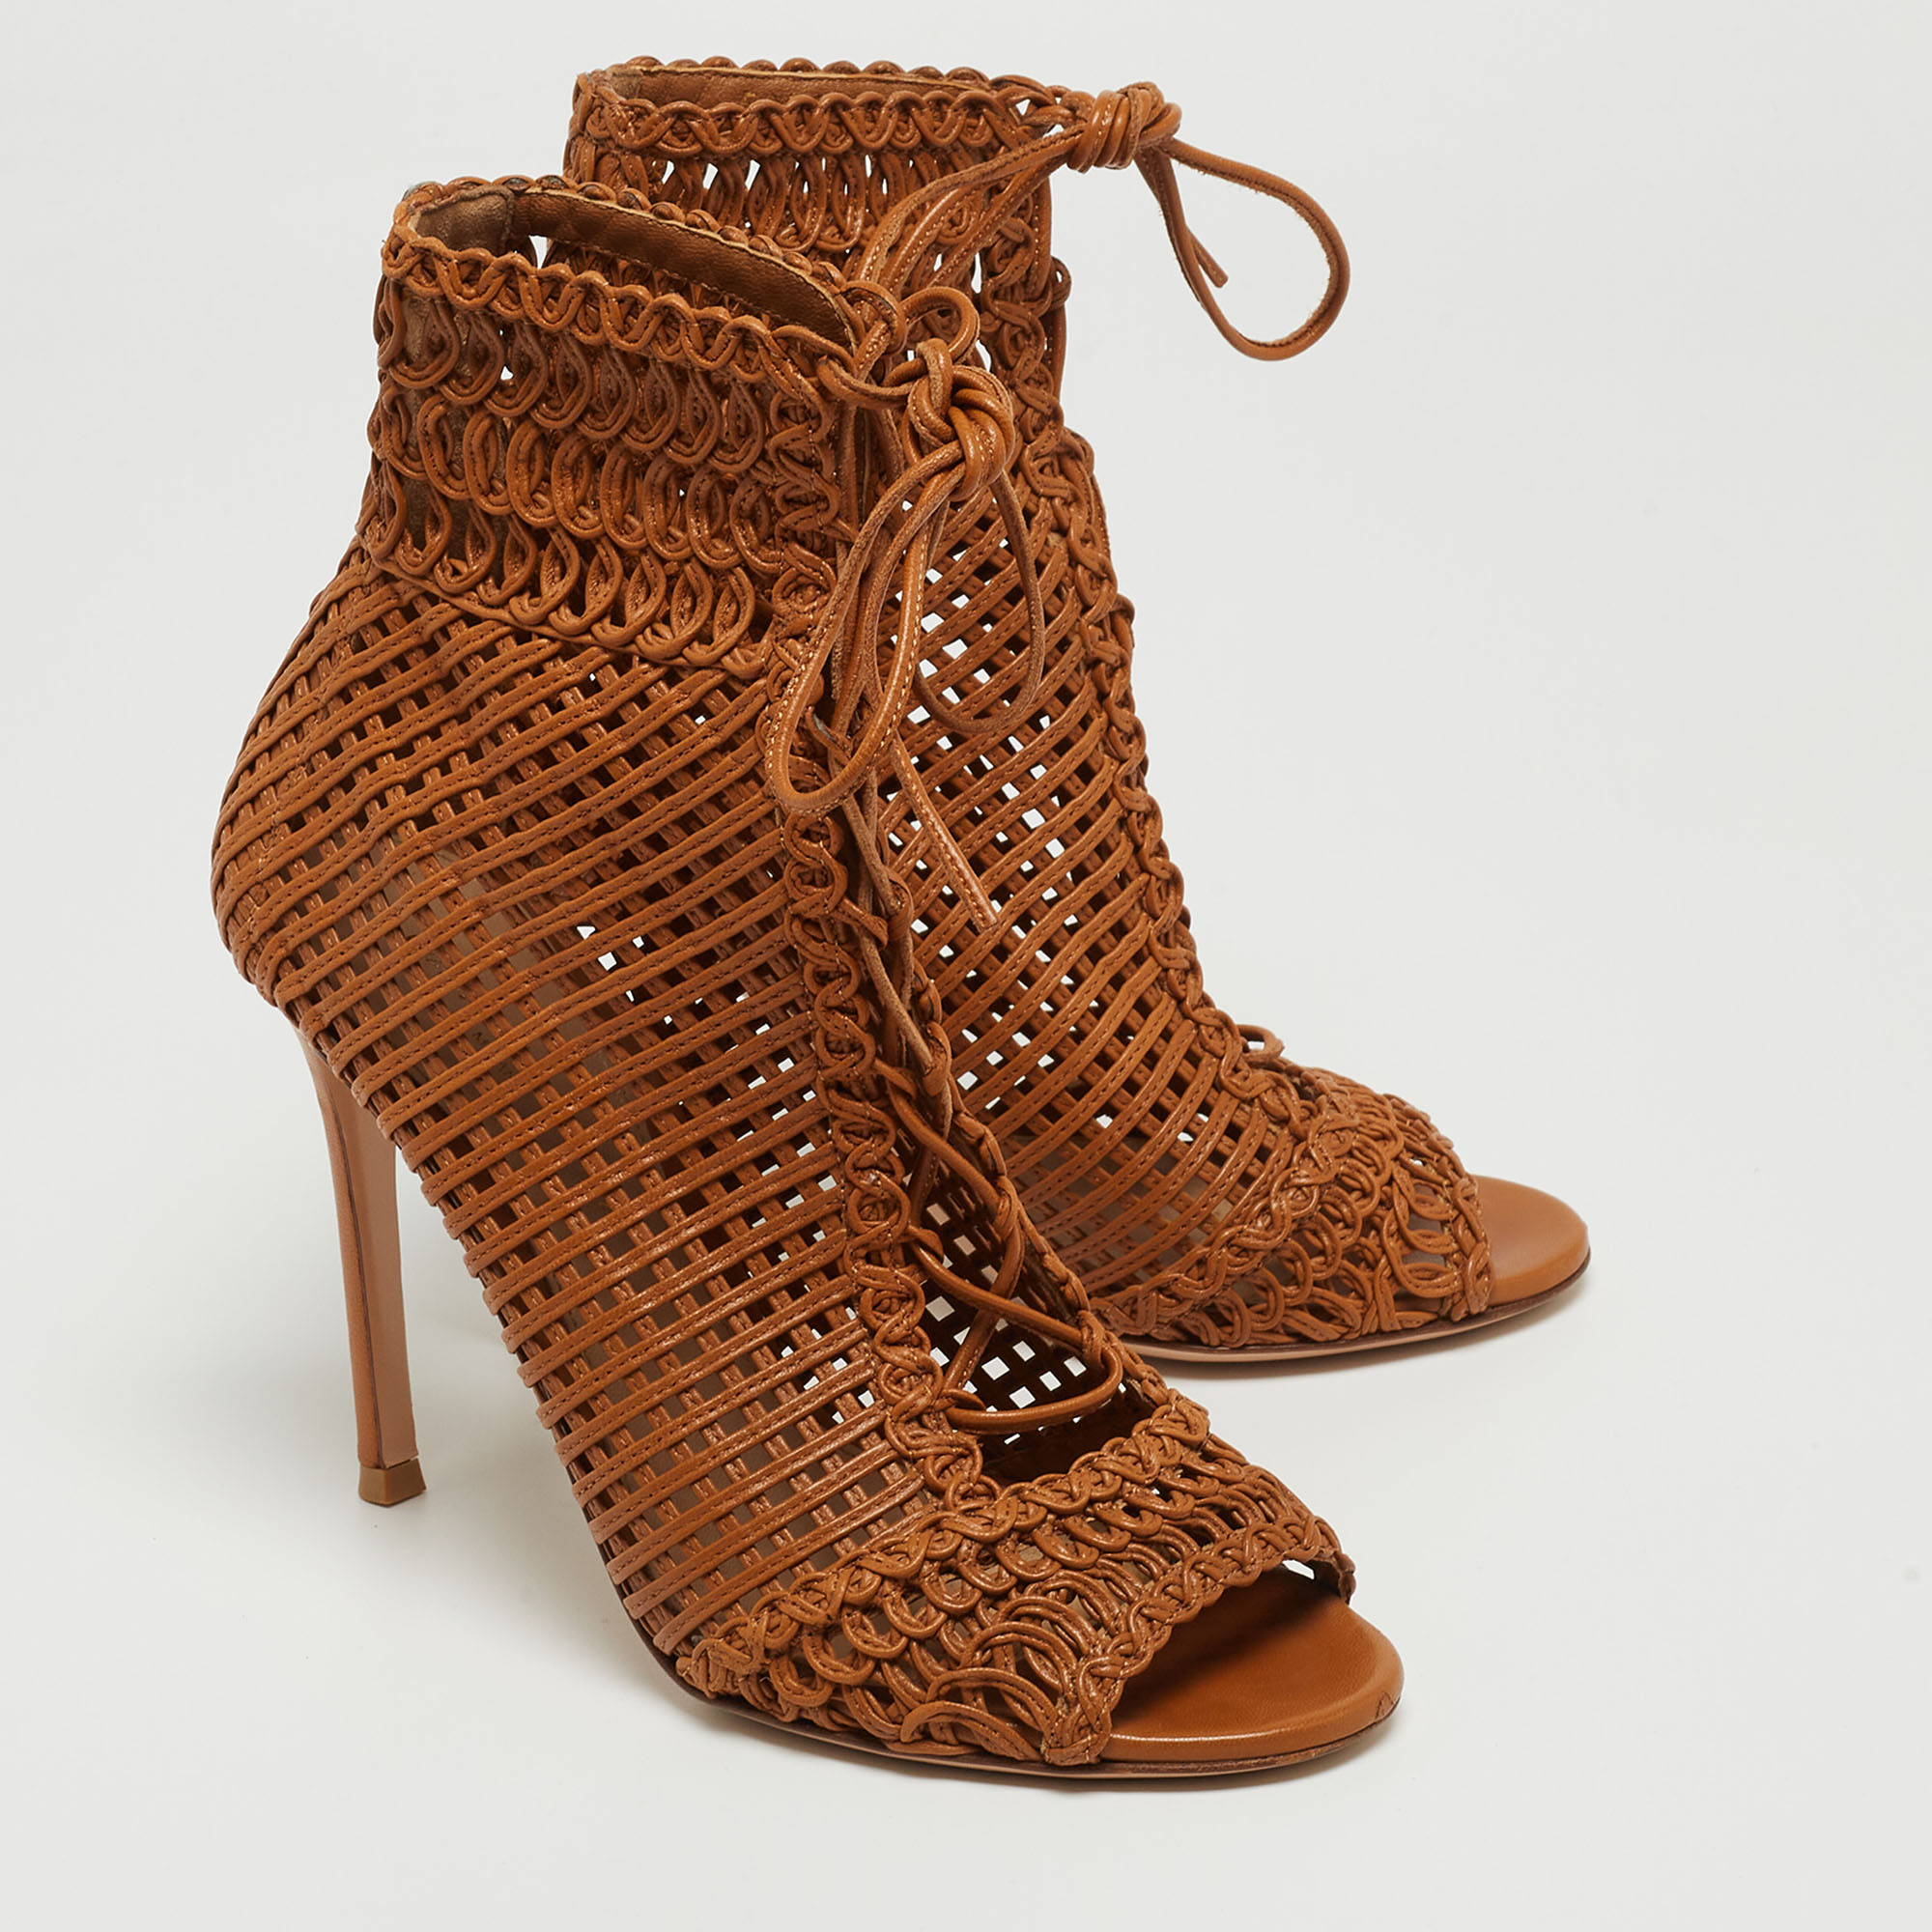 Gianvito Rossi Tan Woven Leather Marnie Ankle Booties Size 36.5